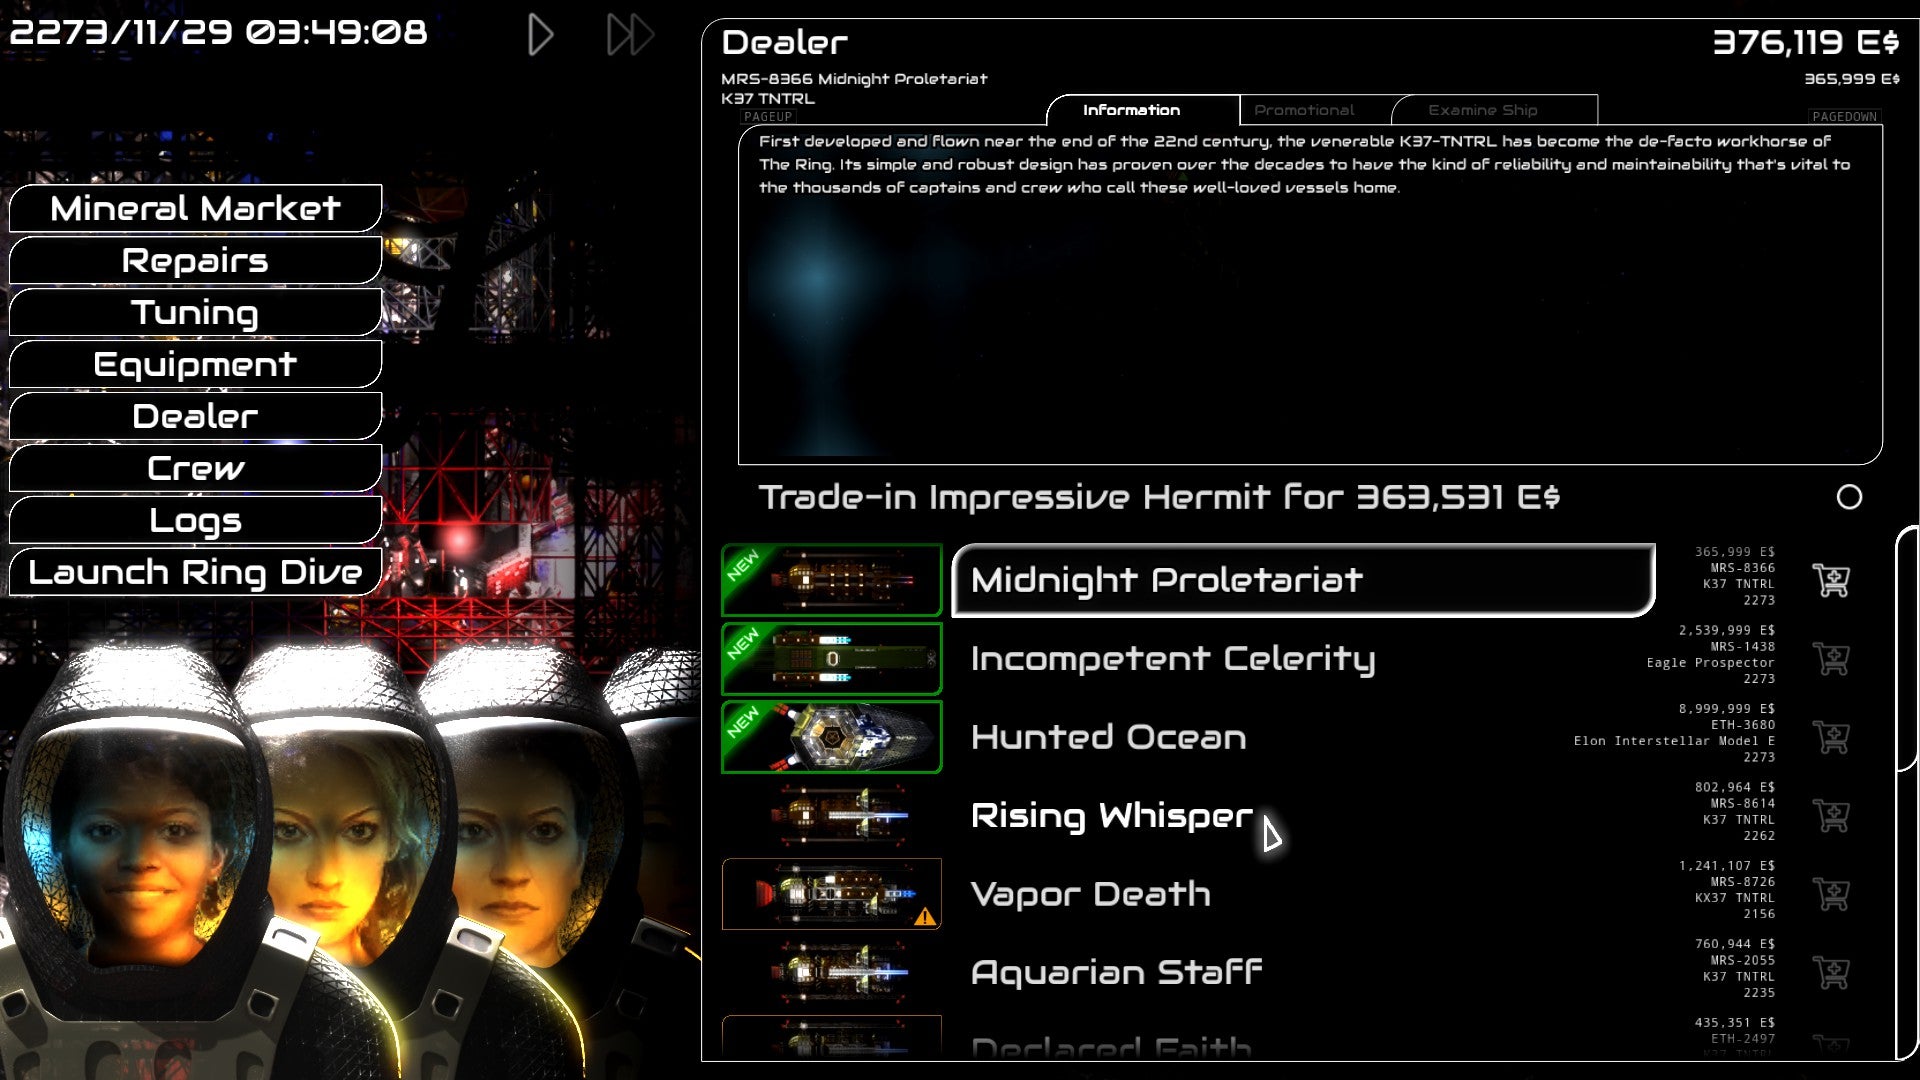 A trading screen in Rings Of Saturn, the three traders' faces in their spacesuits in the bottom left